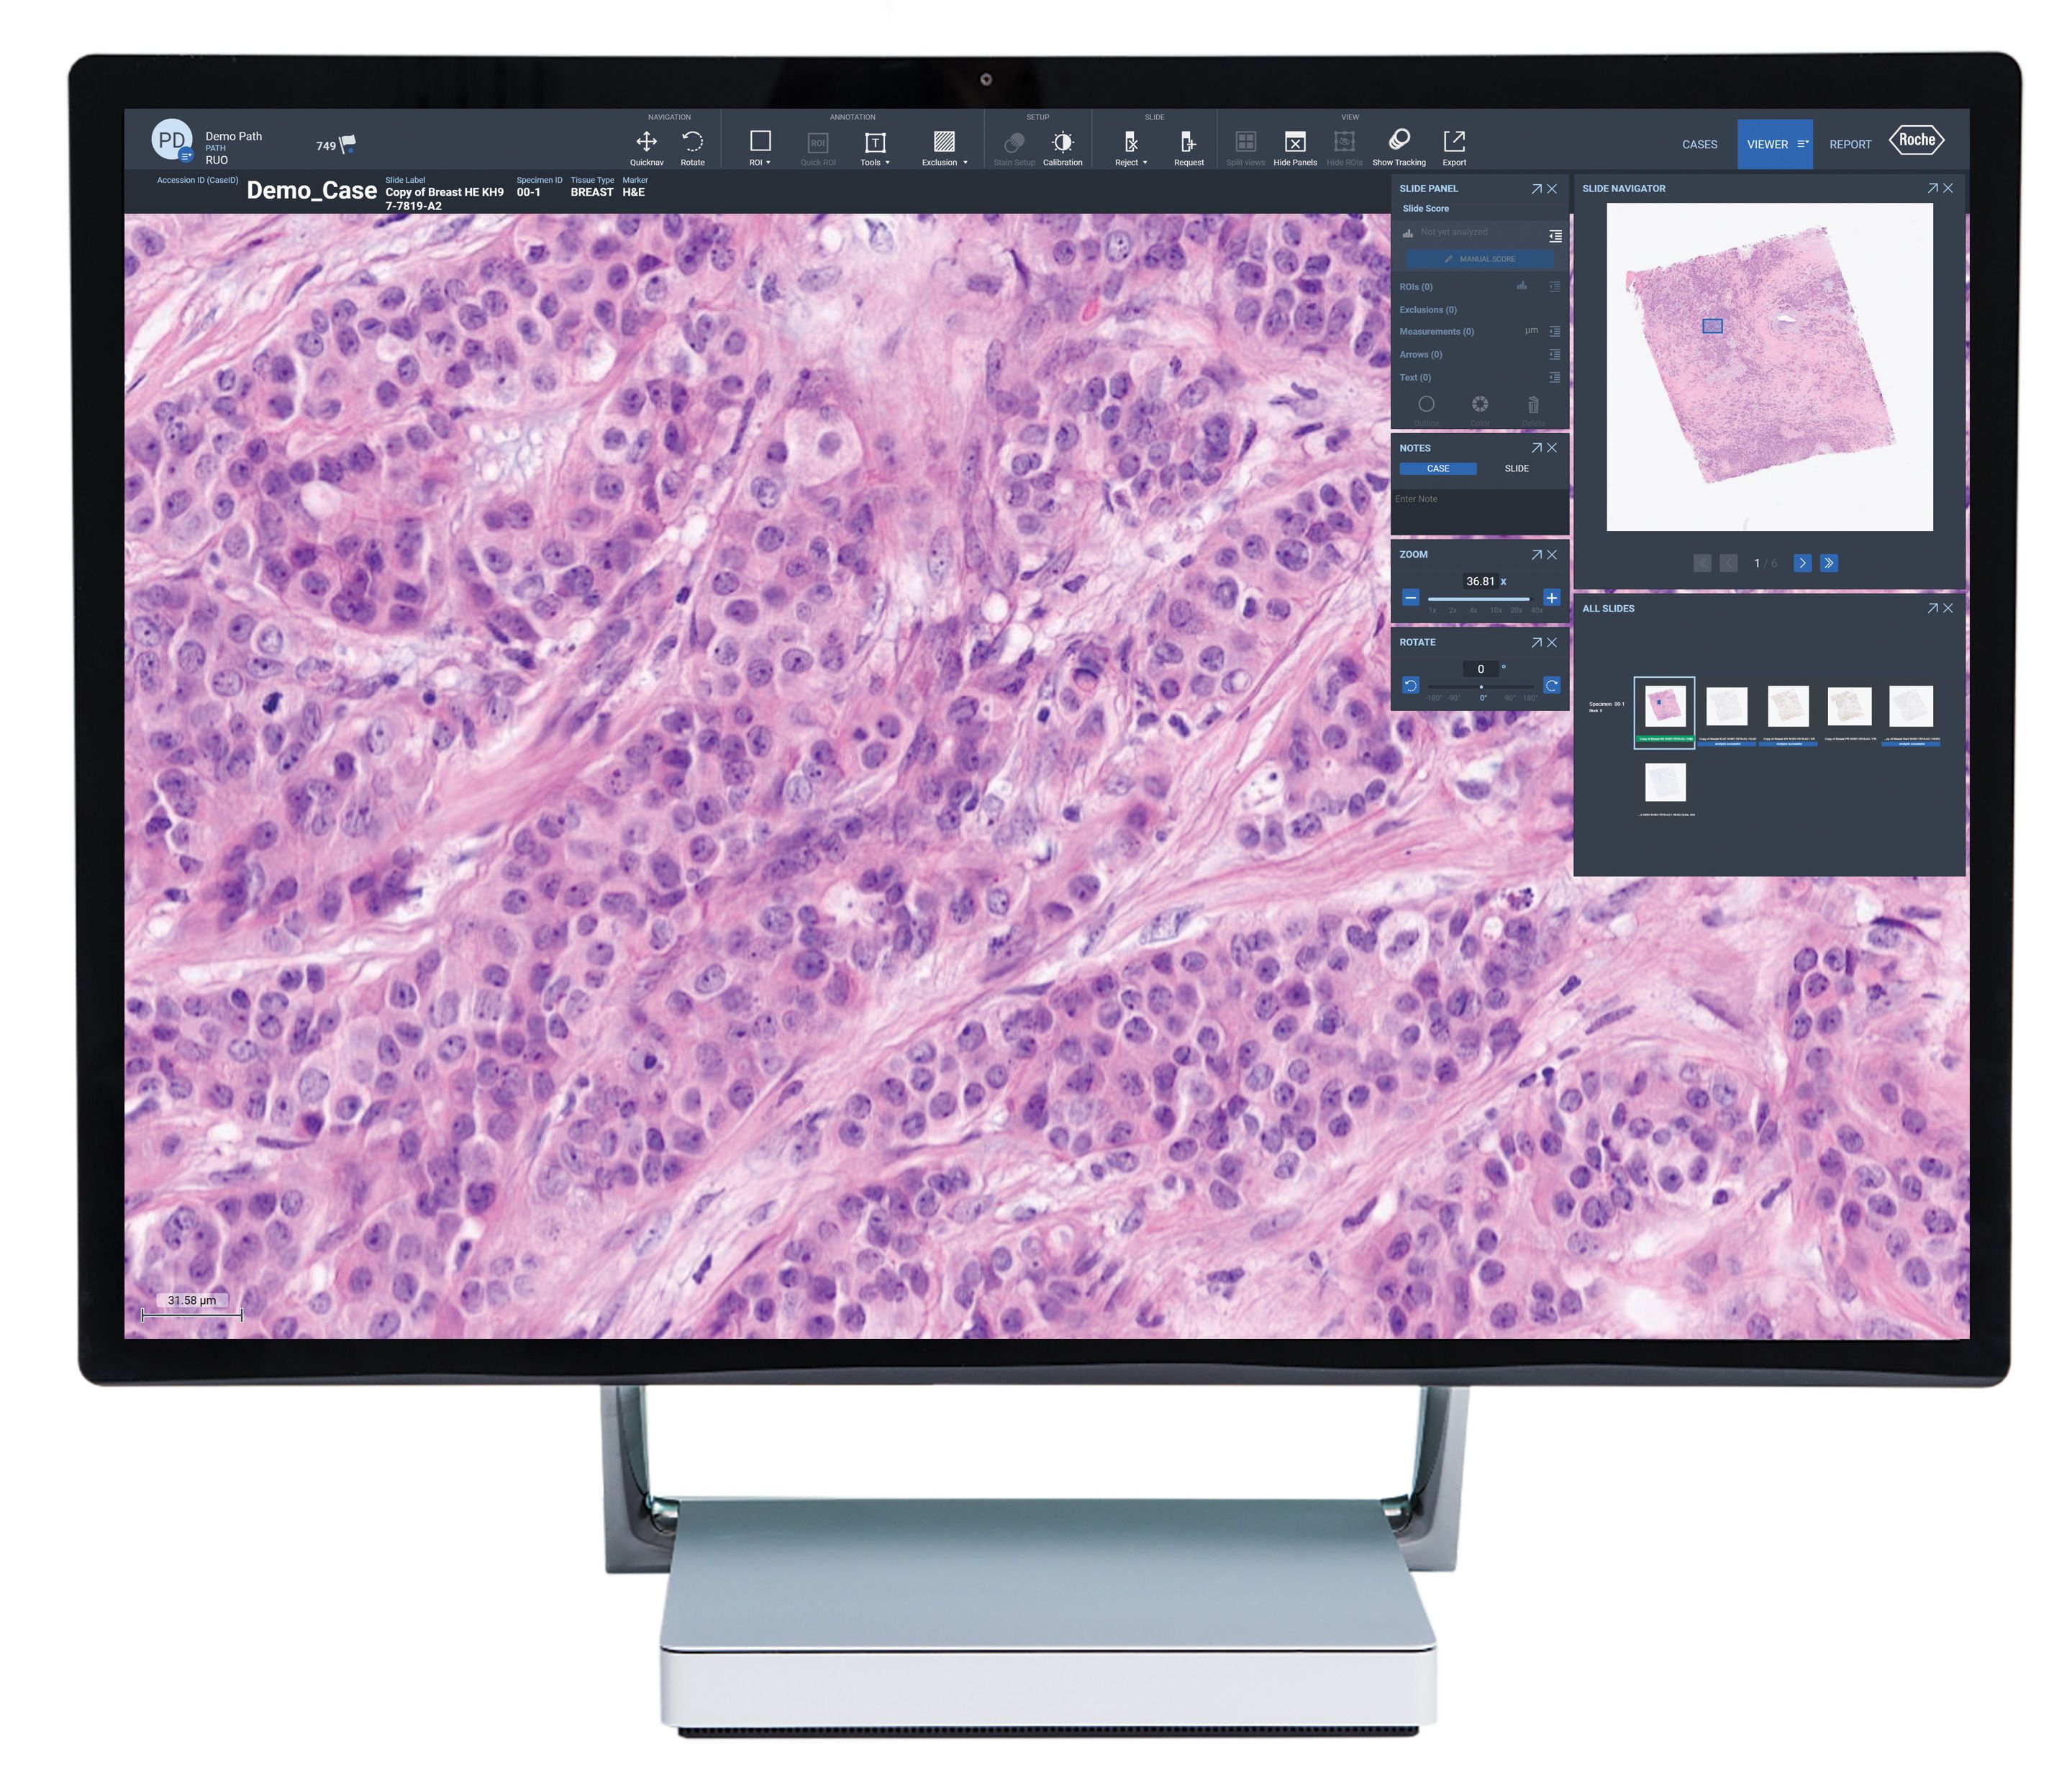 Roche uPath software seamlessly enables communication between pathologists and technicians